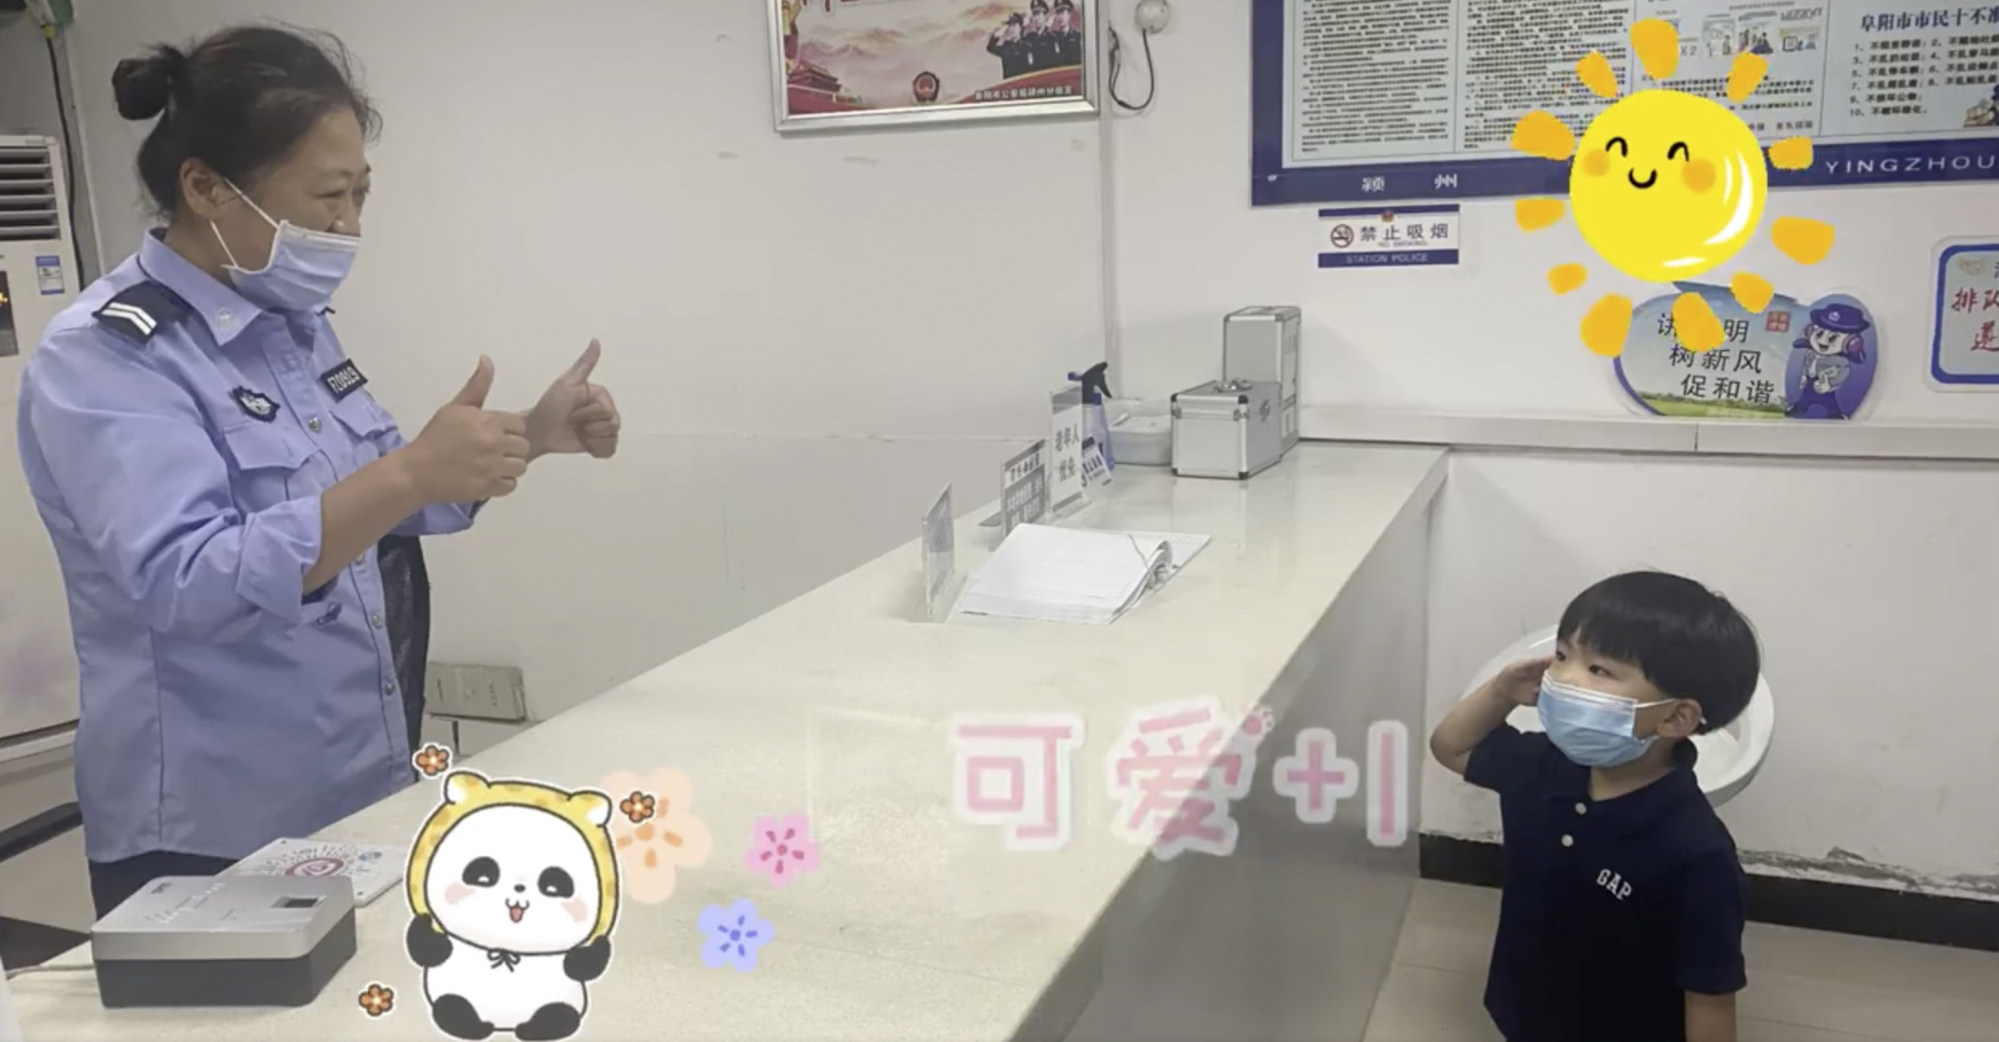 After noticing the boy’s gesture, the policewoman gave him a thumbs up. A Weibo news report about the boy’s cute antics has gone viral. Photo: Handout